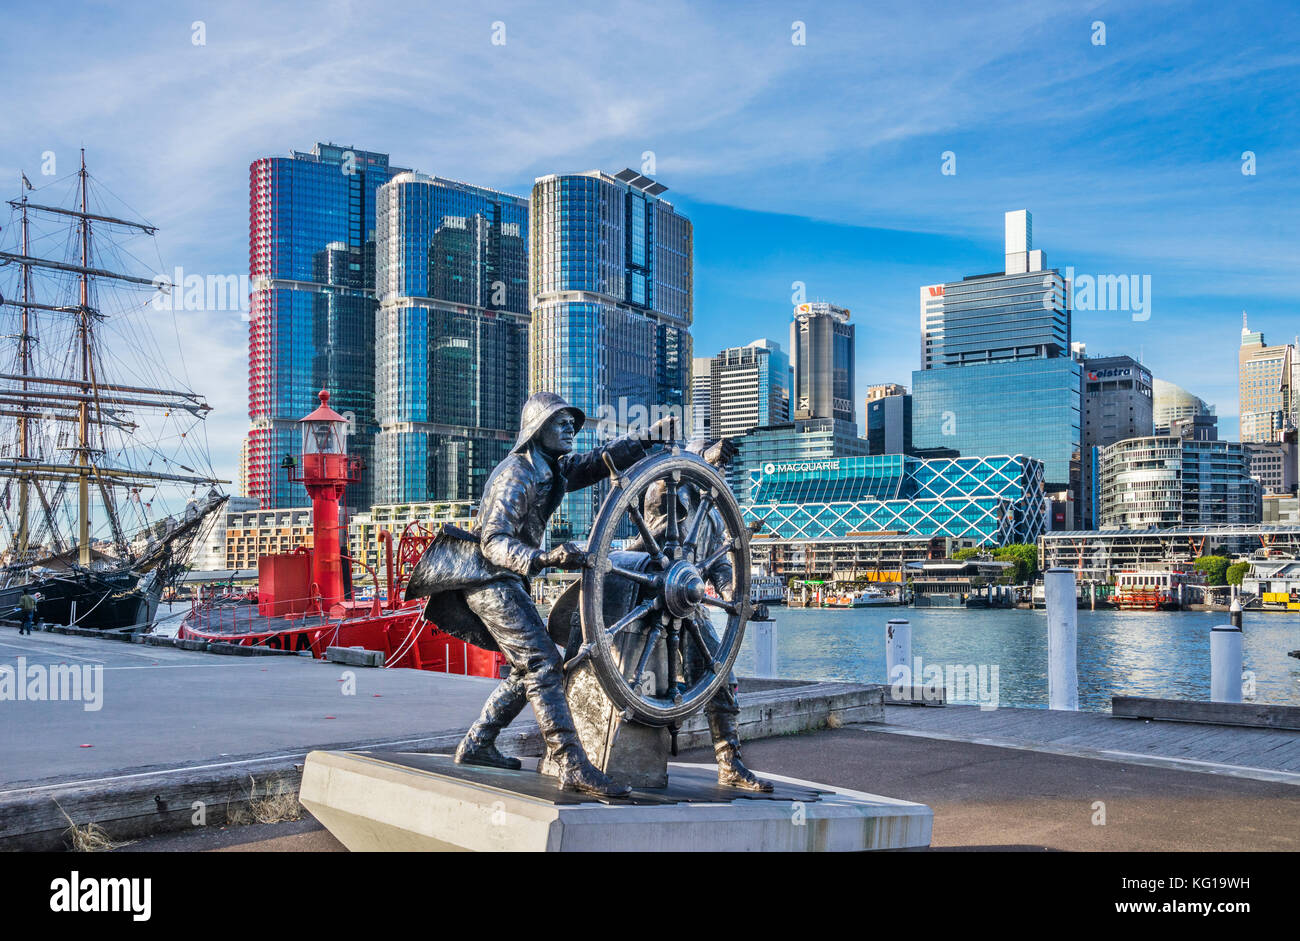 Australia, New South Wales, Sydney, Darling Harbour, bronce sculpture to celebrate windjammer sailors at the Wharf 7 Maritime Heritage Centre Stock Photo